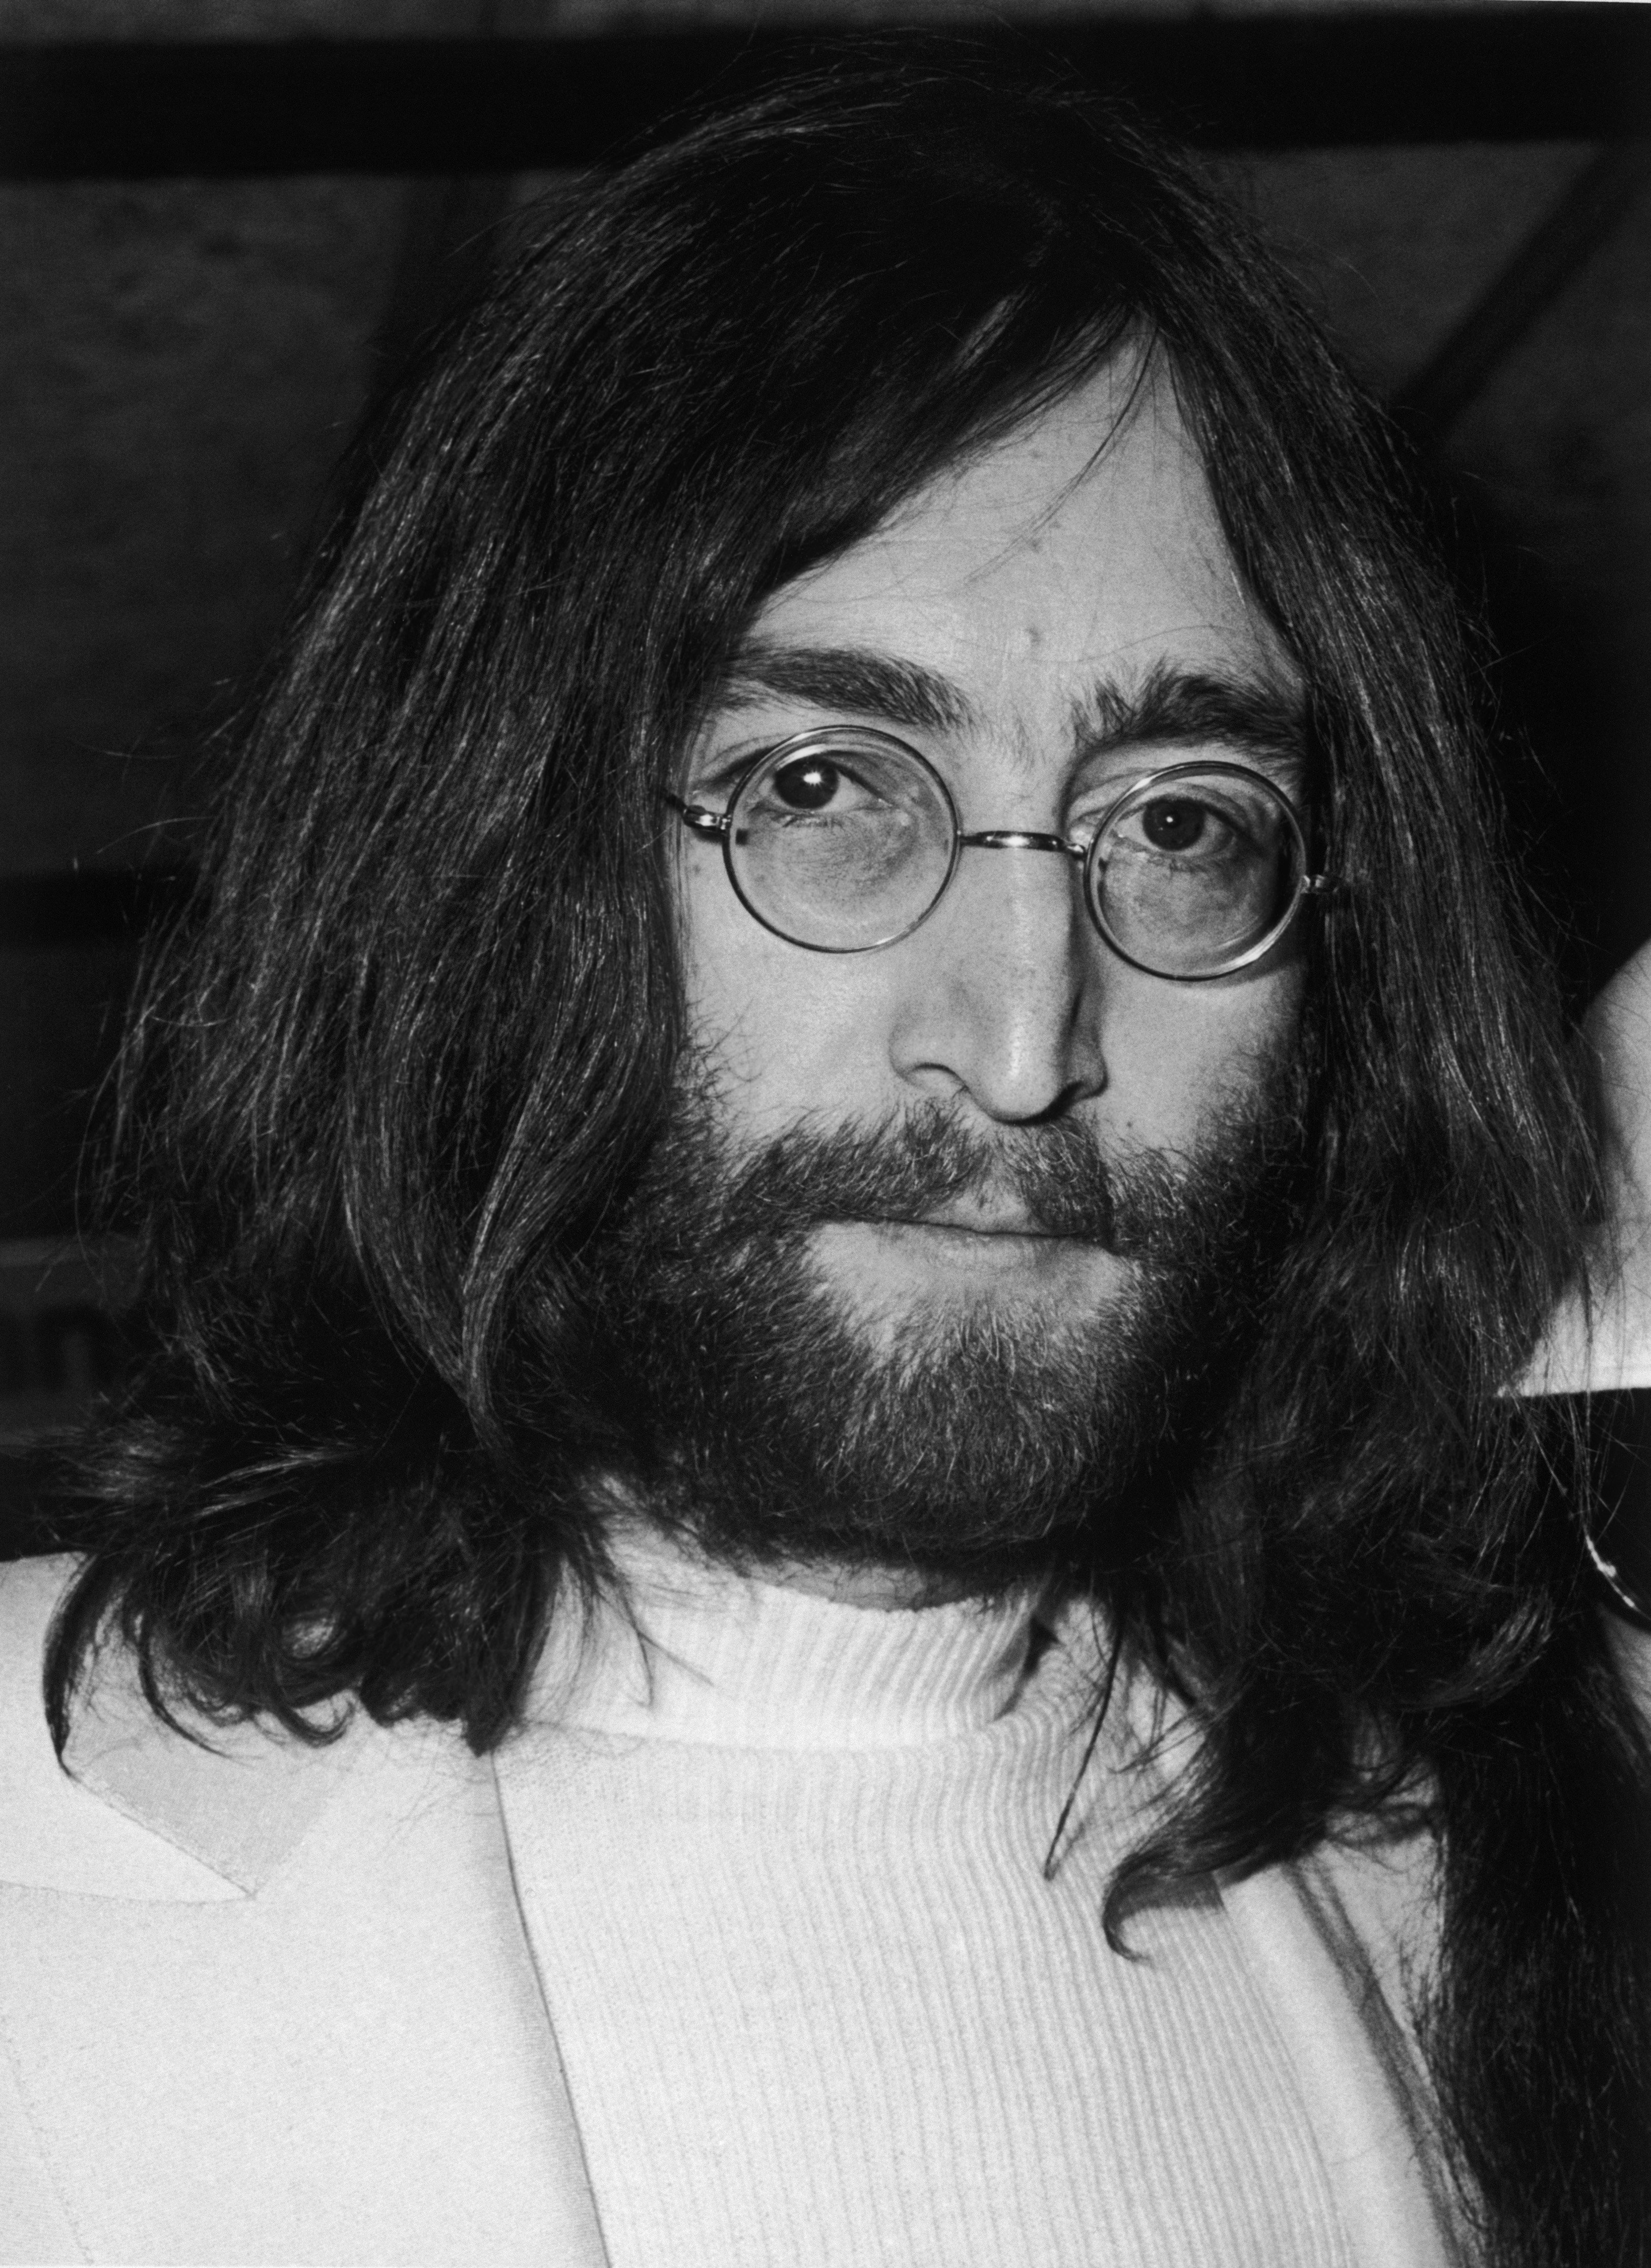 John Lennon of "The Beatles" at a press conference at Heathrow airport. | Source: Getty Images